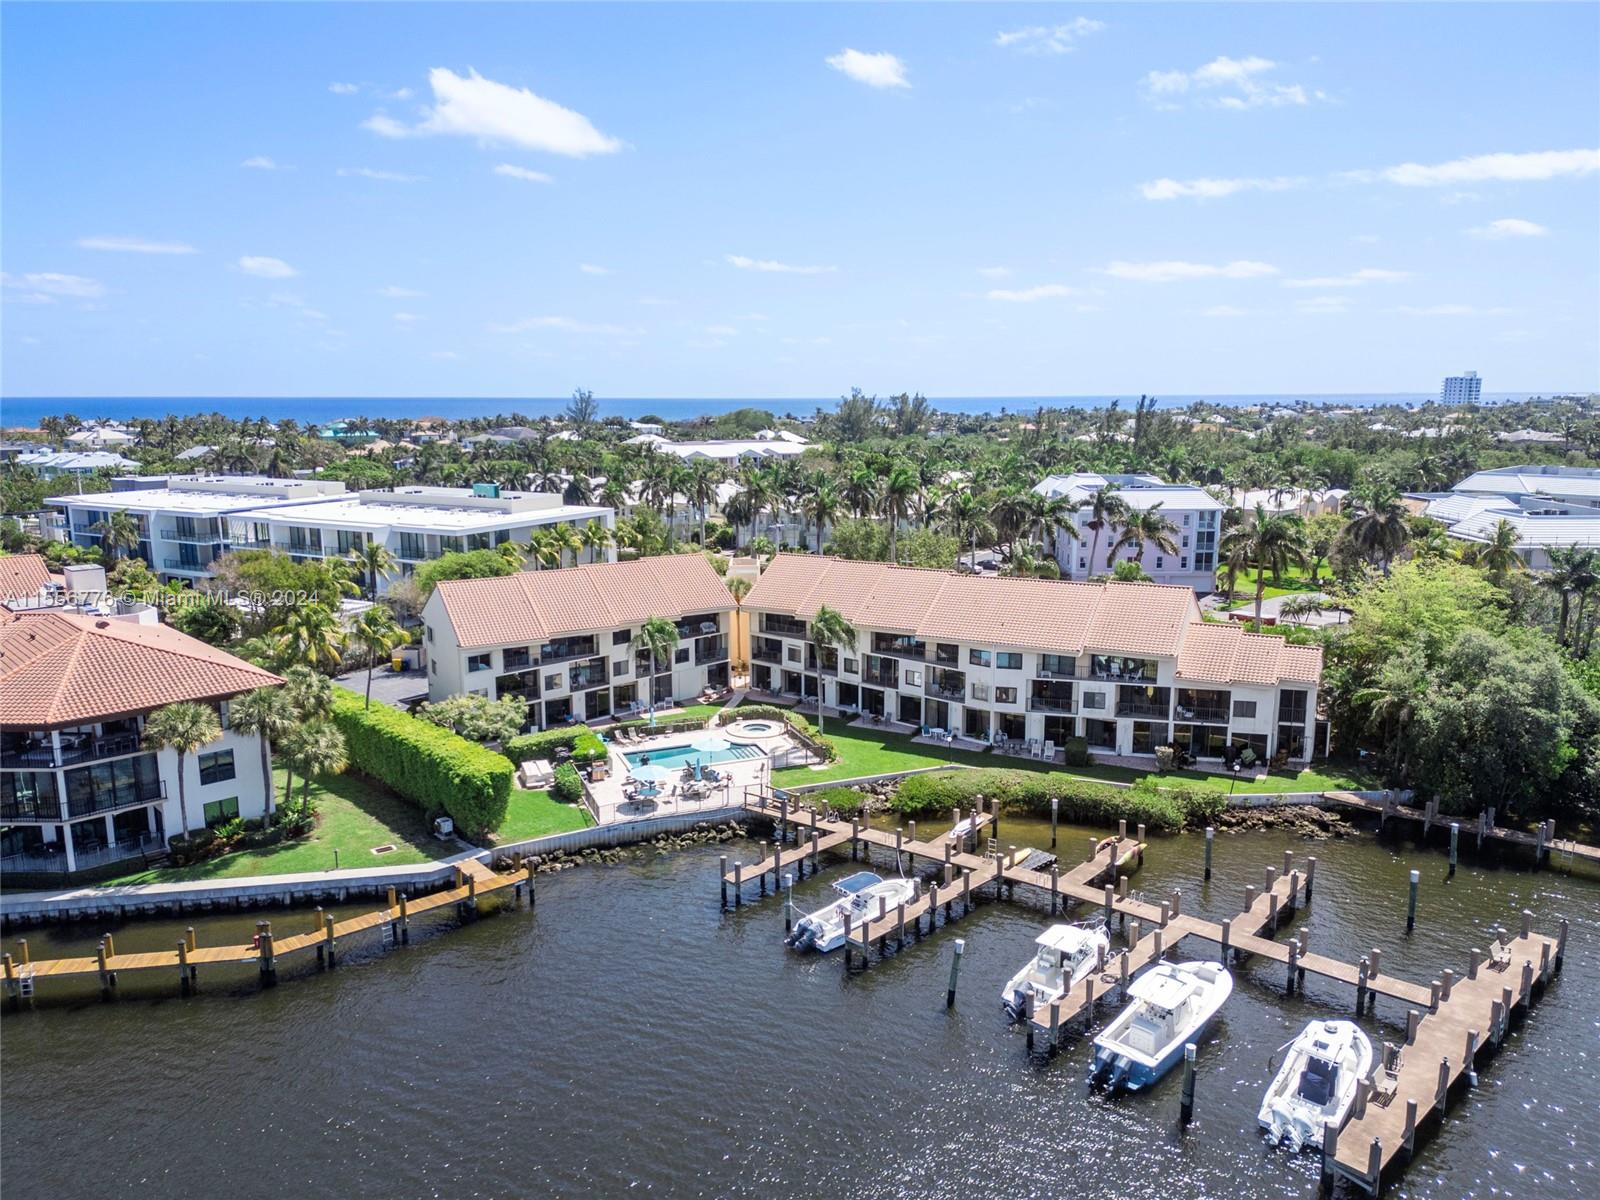 Welcome to your own piece of paradise in the vibrant beach town of Delray Beach, Florida! This stunning 2-bedroom, 2.5-bathroom waterfront condo offers breathtaking views of the intercoastal along with your very own private boat slip. Imagine waking up and enjoying your morning coffee on your private balcony overlooking the water. A perfect blend of luxury and tranquility and just 2 blocks away from the beach!

Step inside this luxurious condo and you will find spacious living areas and nearly wall to wall sliding doors with unobstructed views of the water!

Upstairs, you'll find two generously sized bedrooms, each with its own en-suite bathroom for added convenience. The master bedroom offers stunning views of the intercoastal, providing a picturesque backdrop.